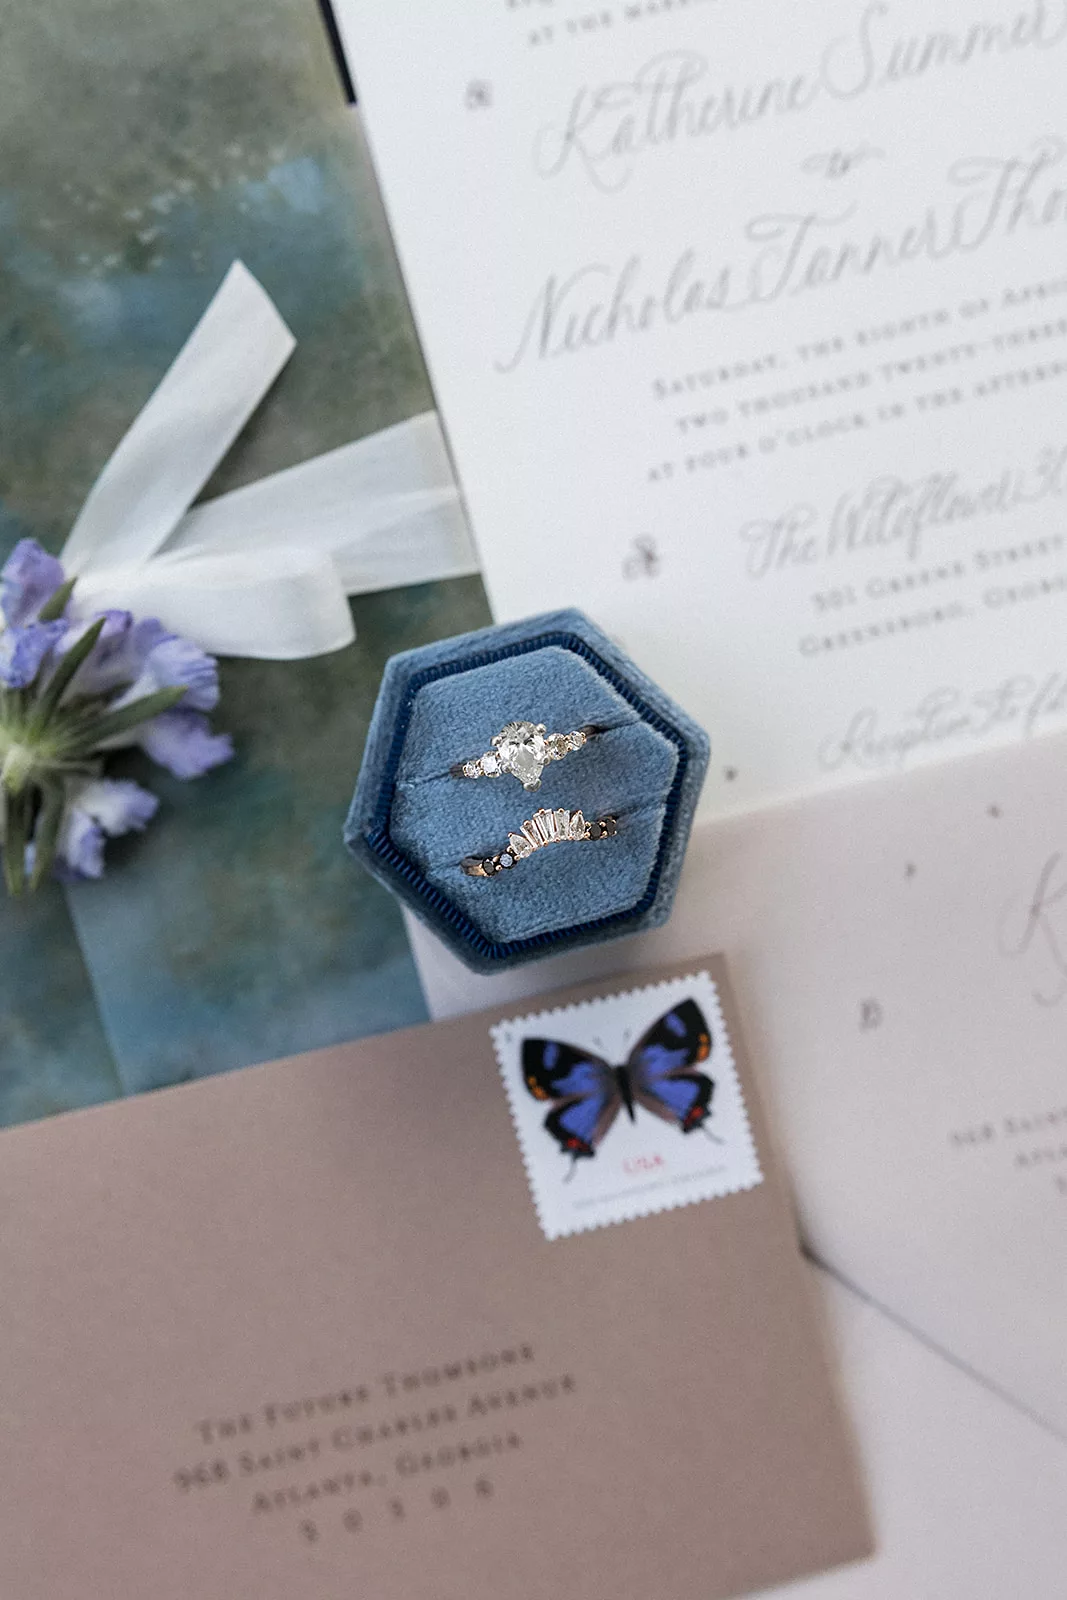 Details of wedding bands in a ring box surrounded by wedding invitations on a table